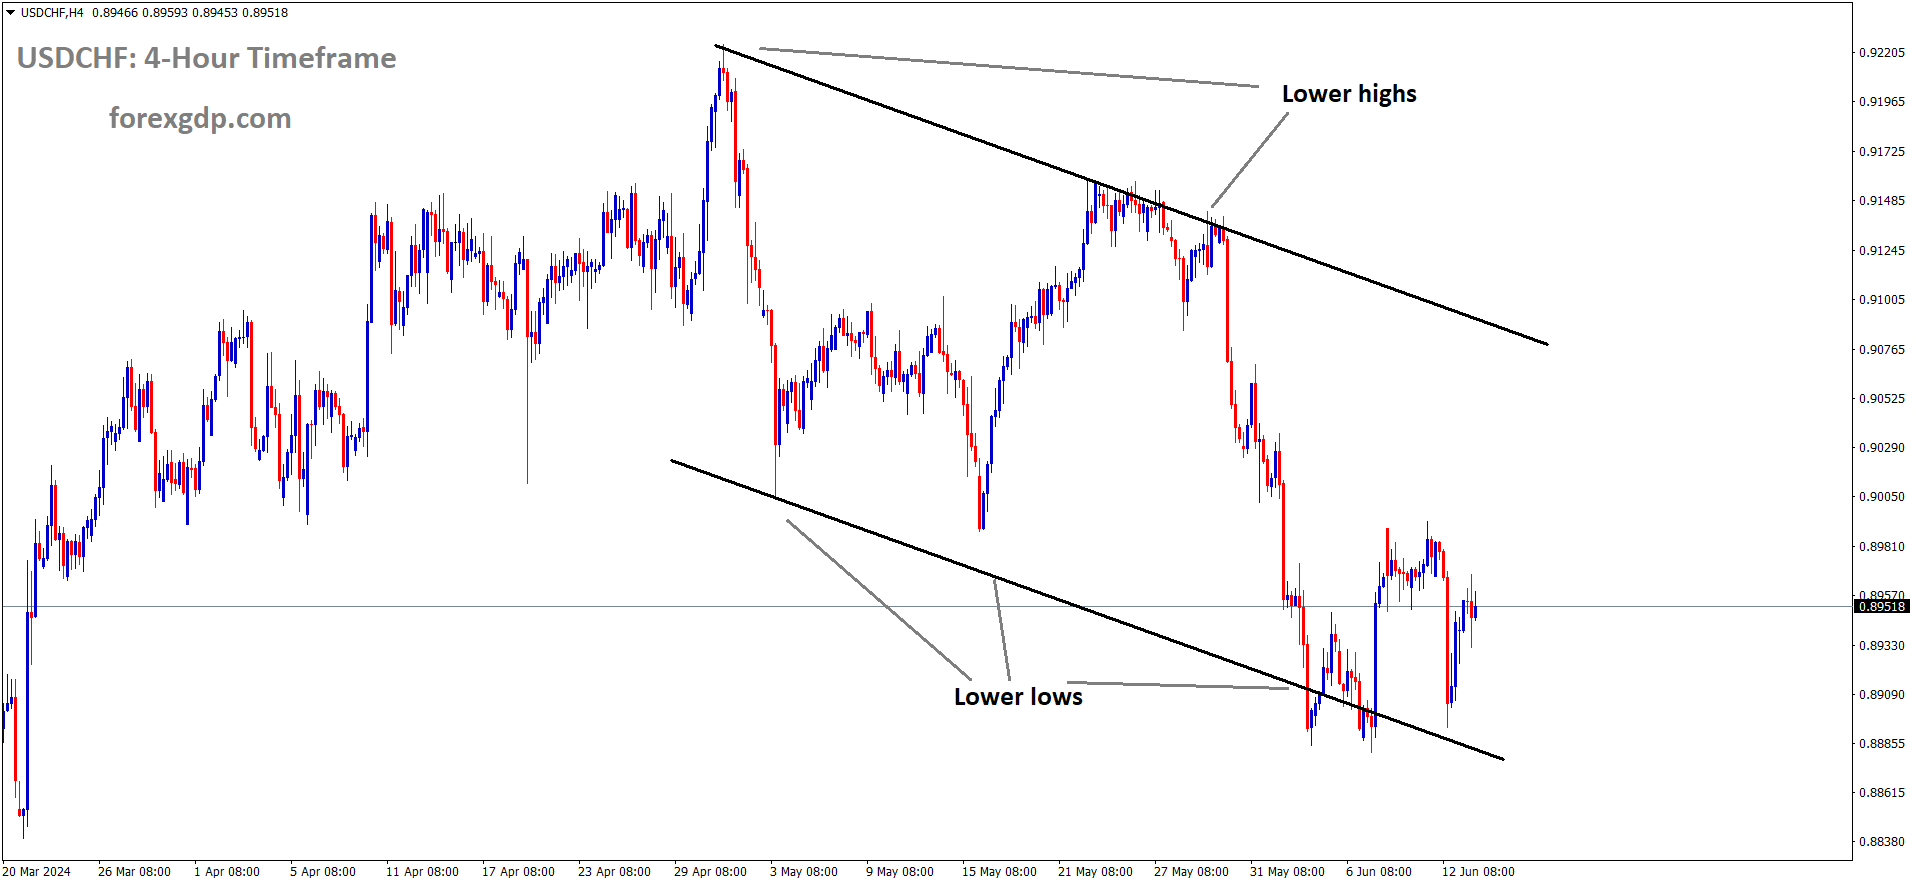 USDCHF is moving in Descending channel and market has rebounded from the lower low area of the channel